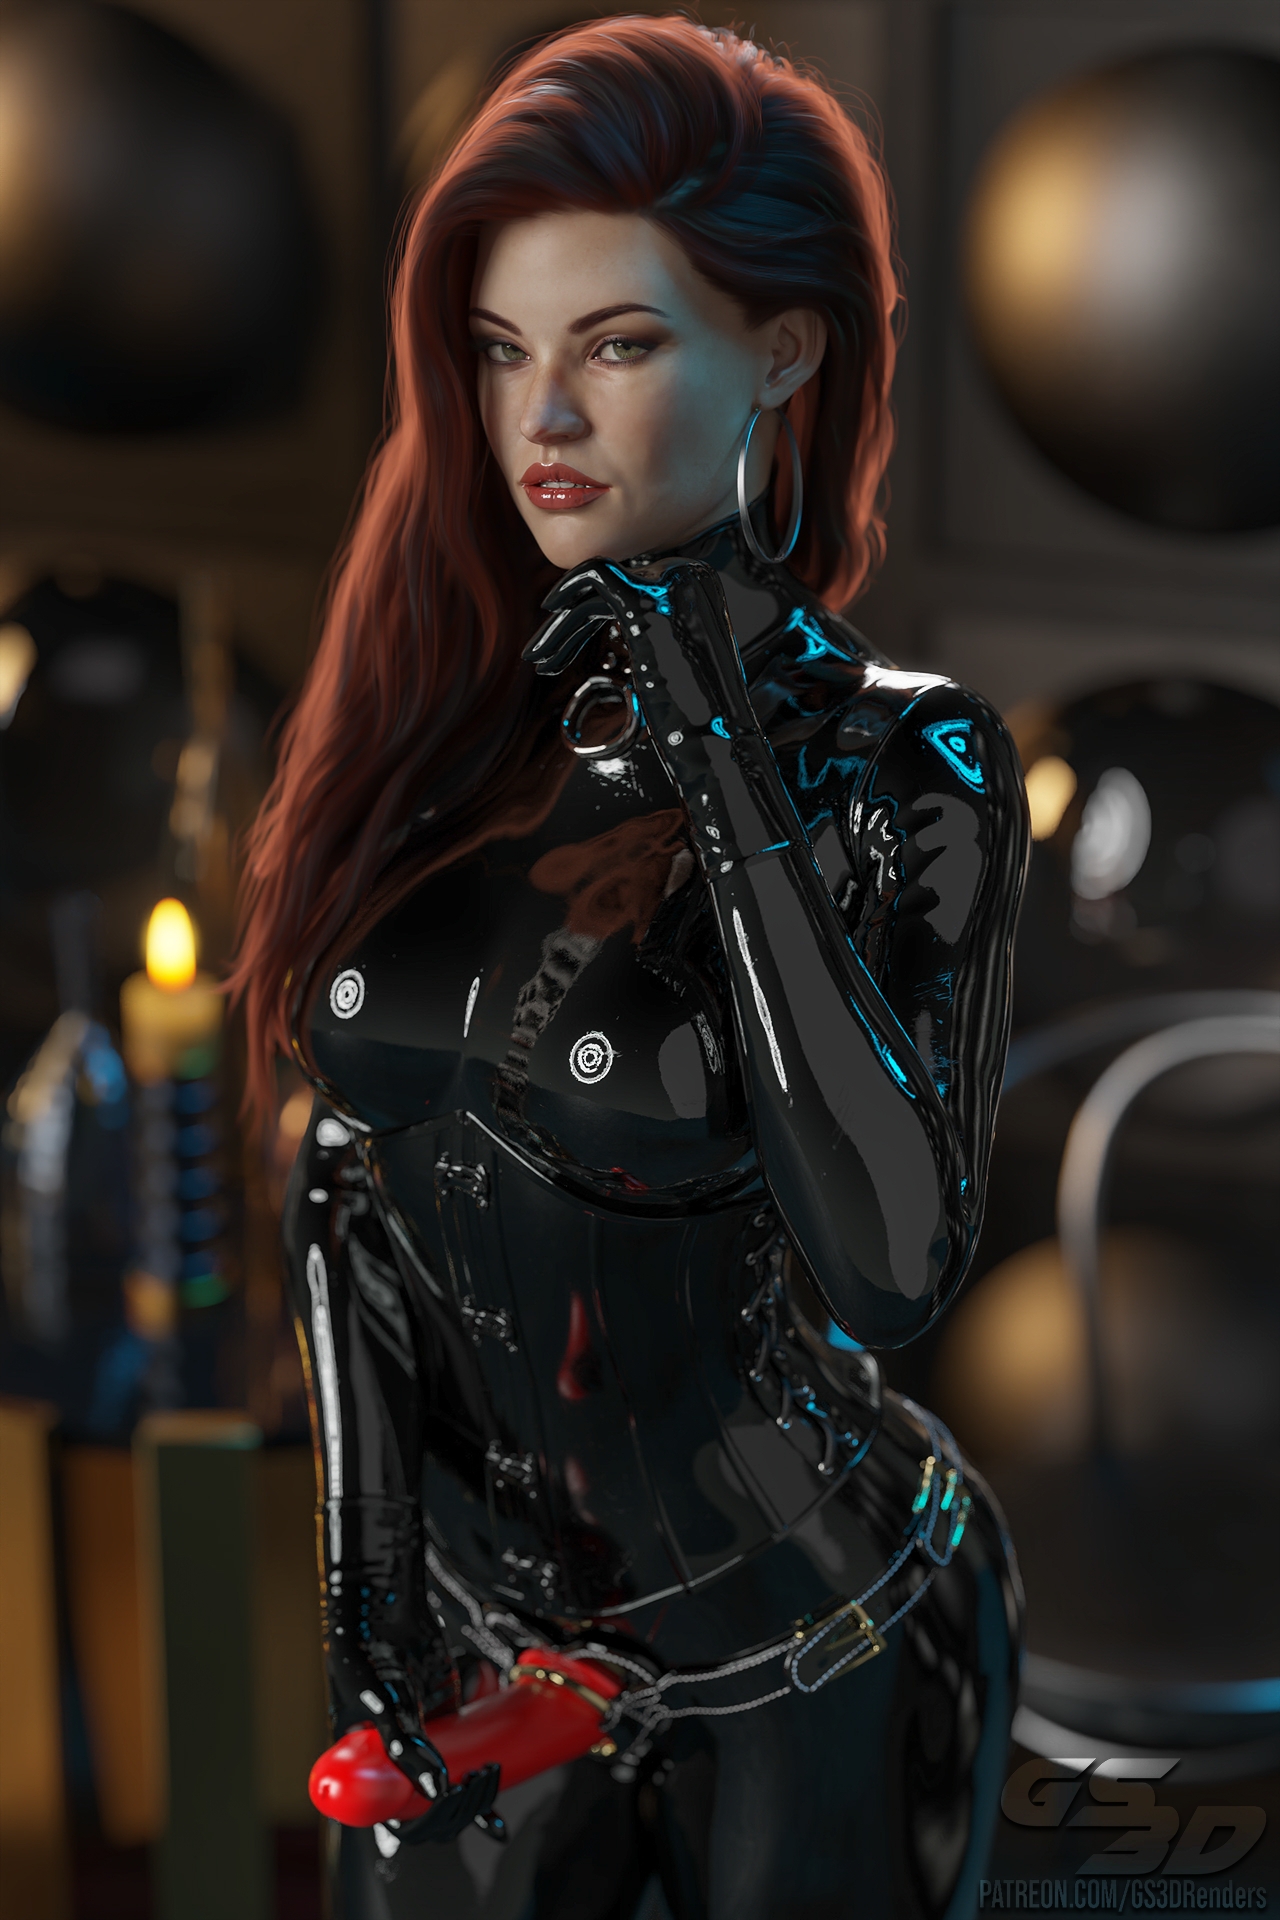 Latex Photoshoot 3 [HD]  Latex Rubber Latex Suit Latex Gloves Strapon Red Hair Femdom Dominatrix Domme Catsuit Bodysuit